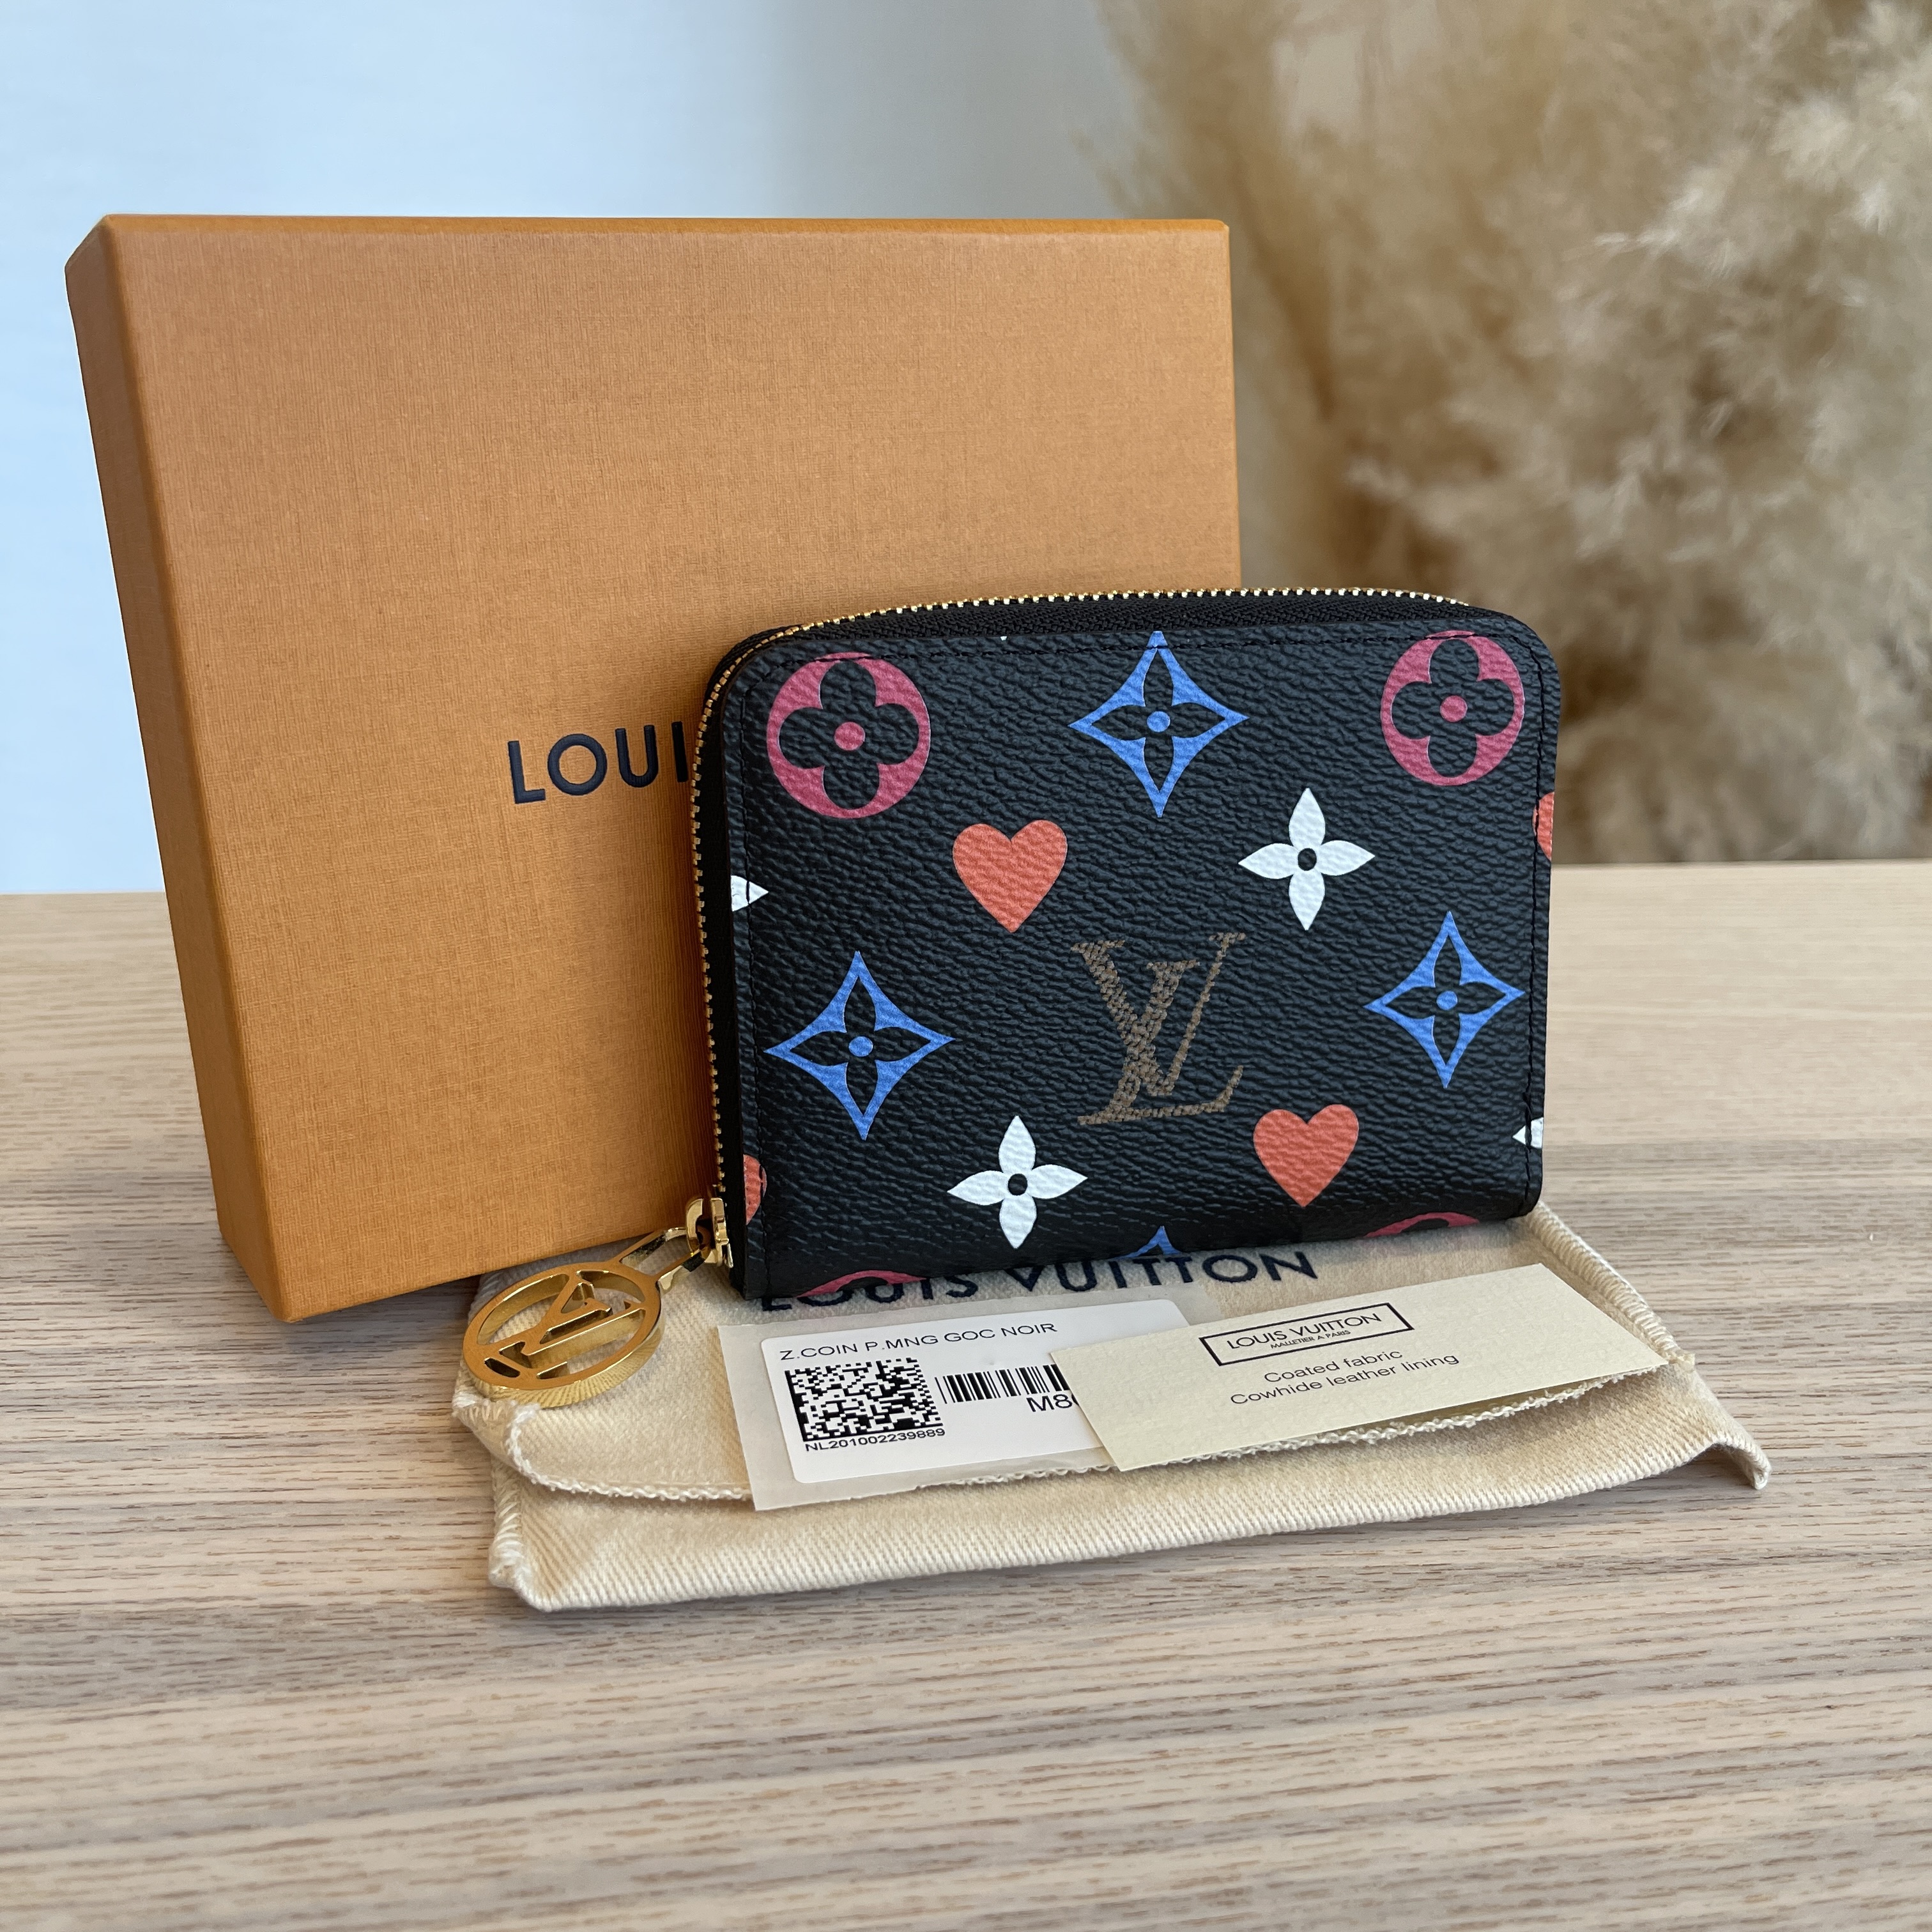 (LV-Round-Coin) Liner for LV Round Coin Purse